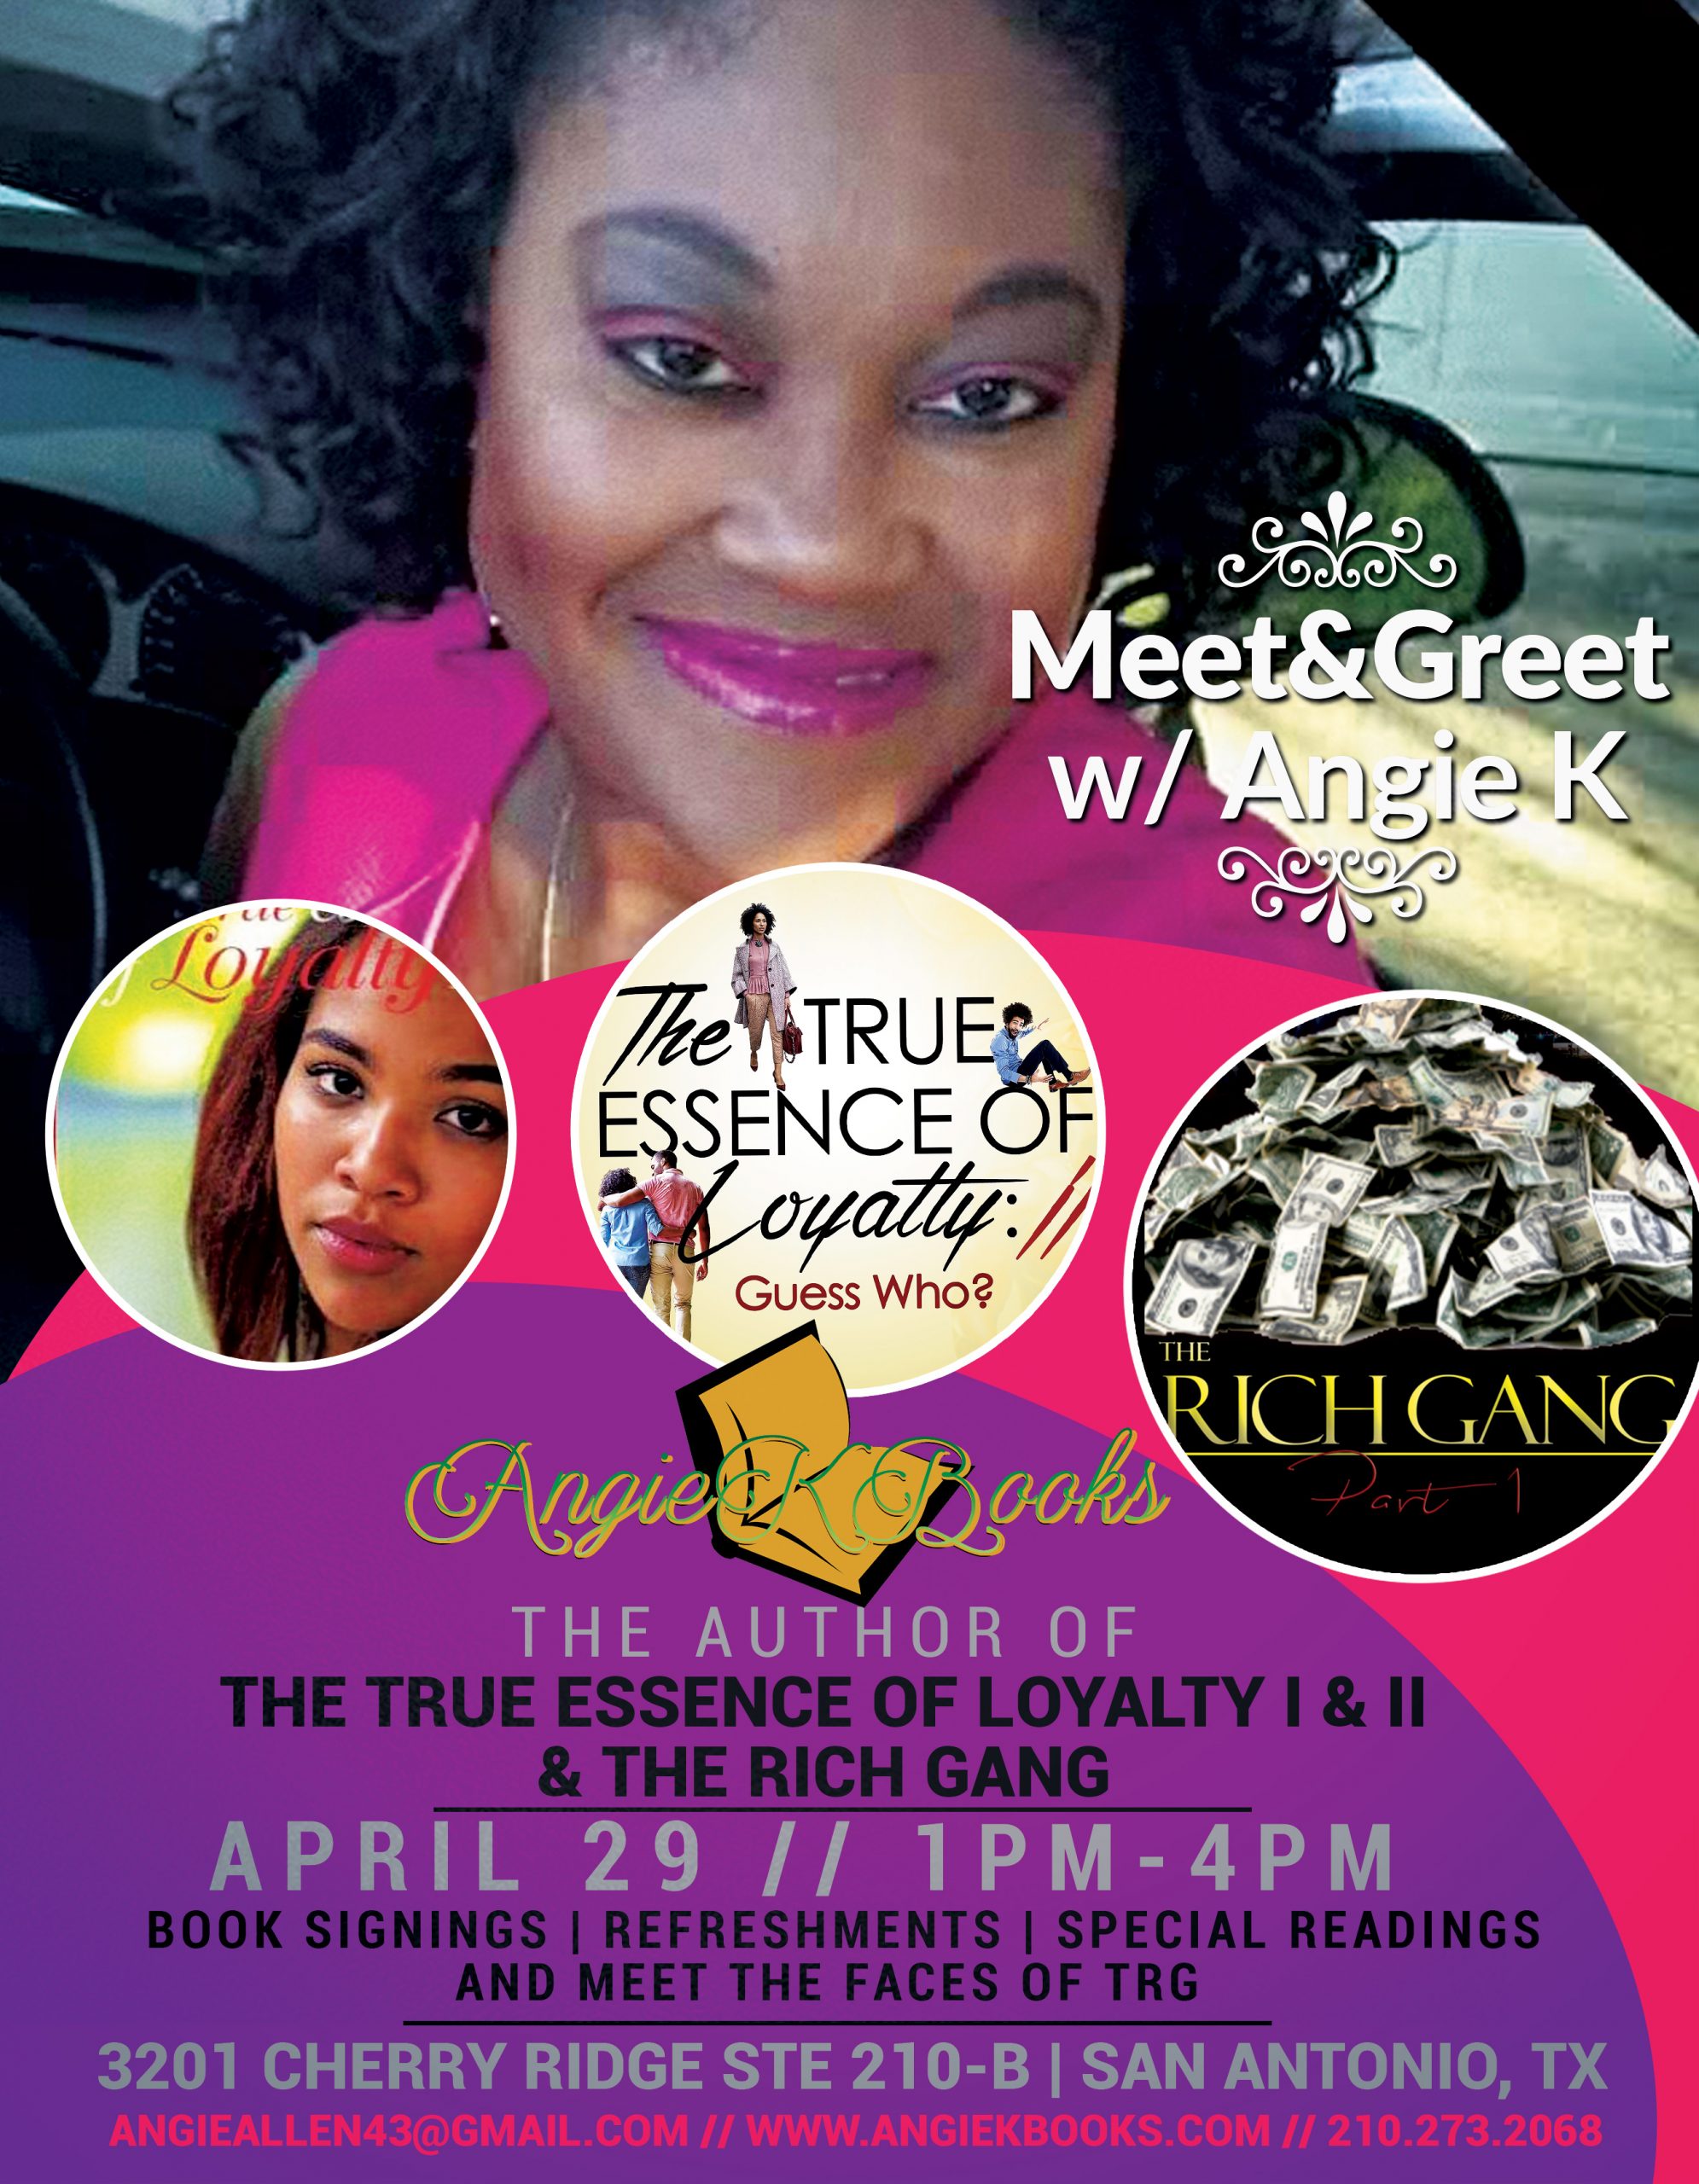 Author Angie K Meet and Greet/Book Signing